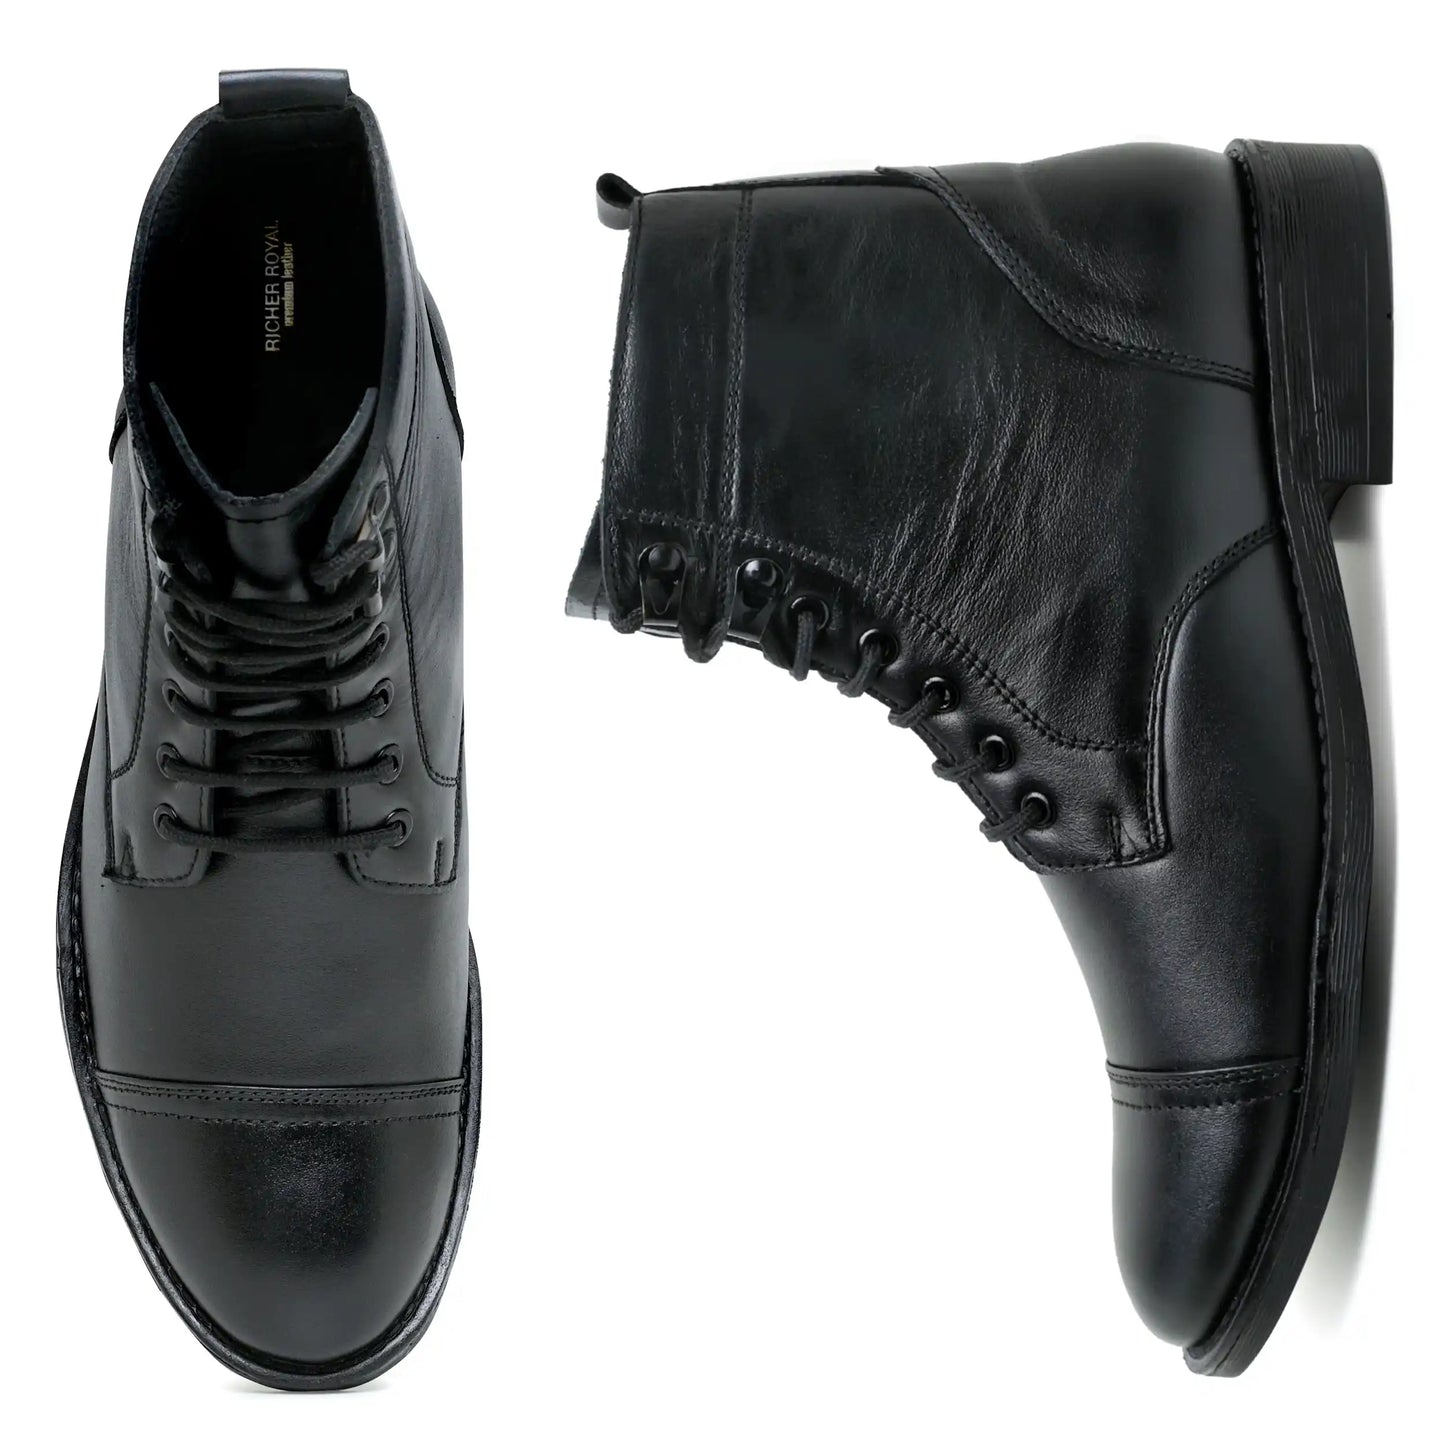 Genuine Leather High Neck Boots Ankle Shoes